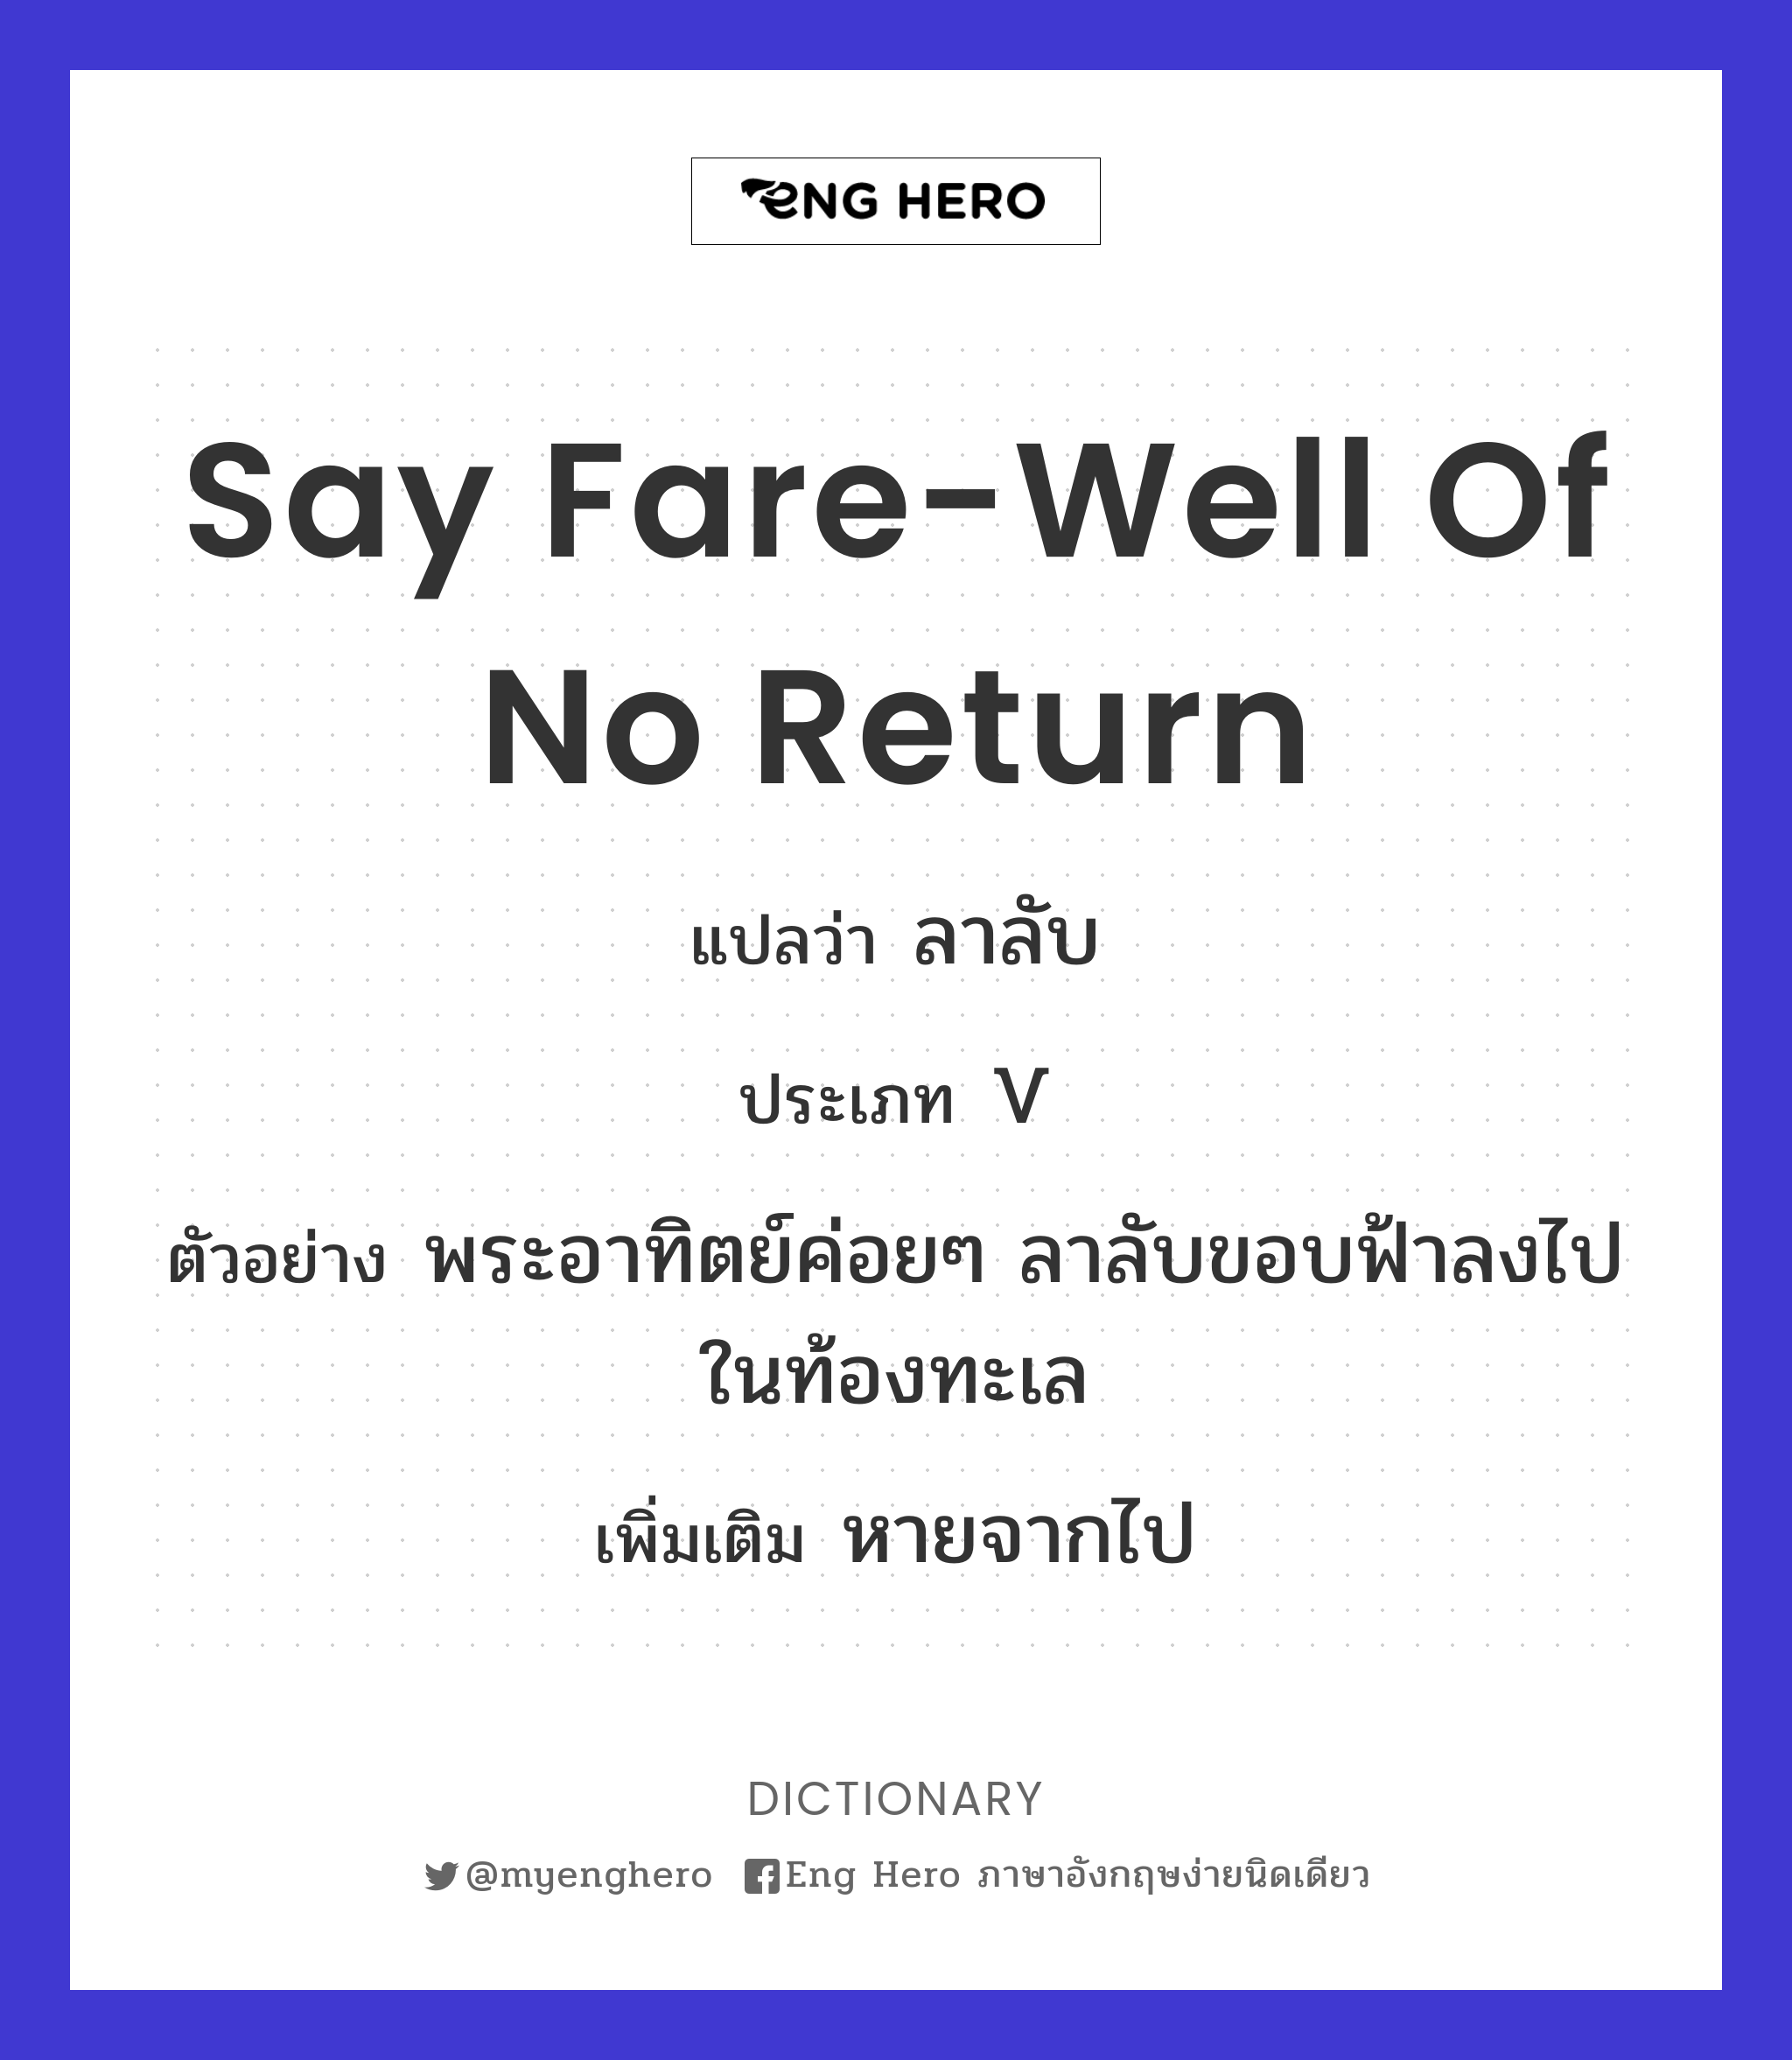 say fare-well of no return